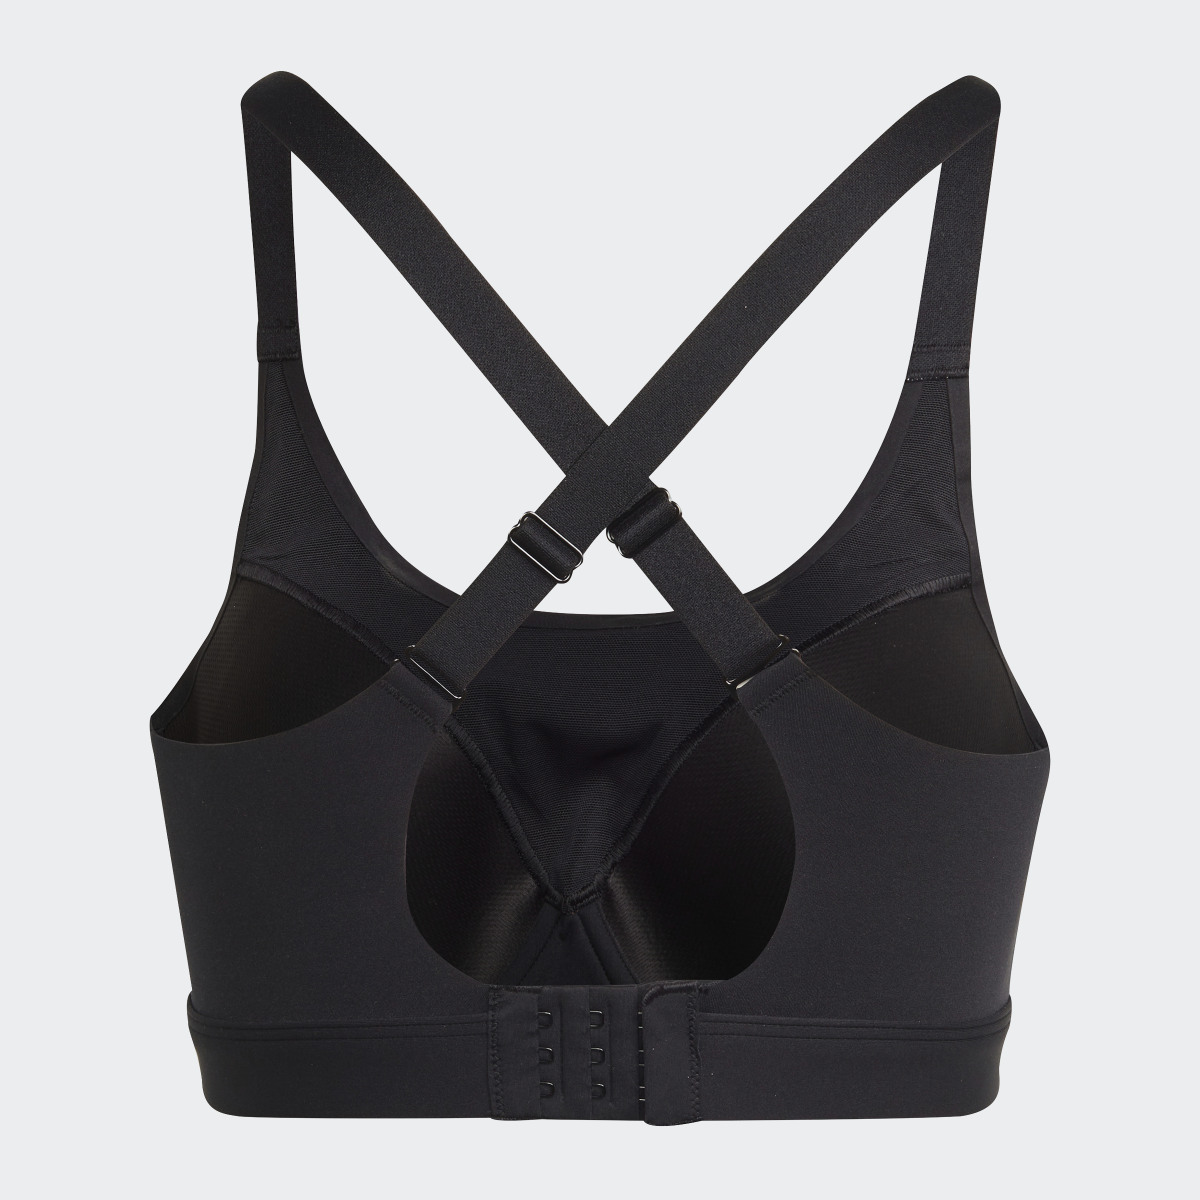 Adidas Brassière Tailored Impact Luxe Training Maintien fort. 8